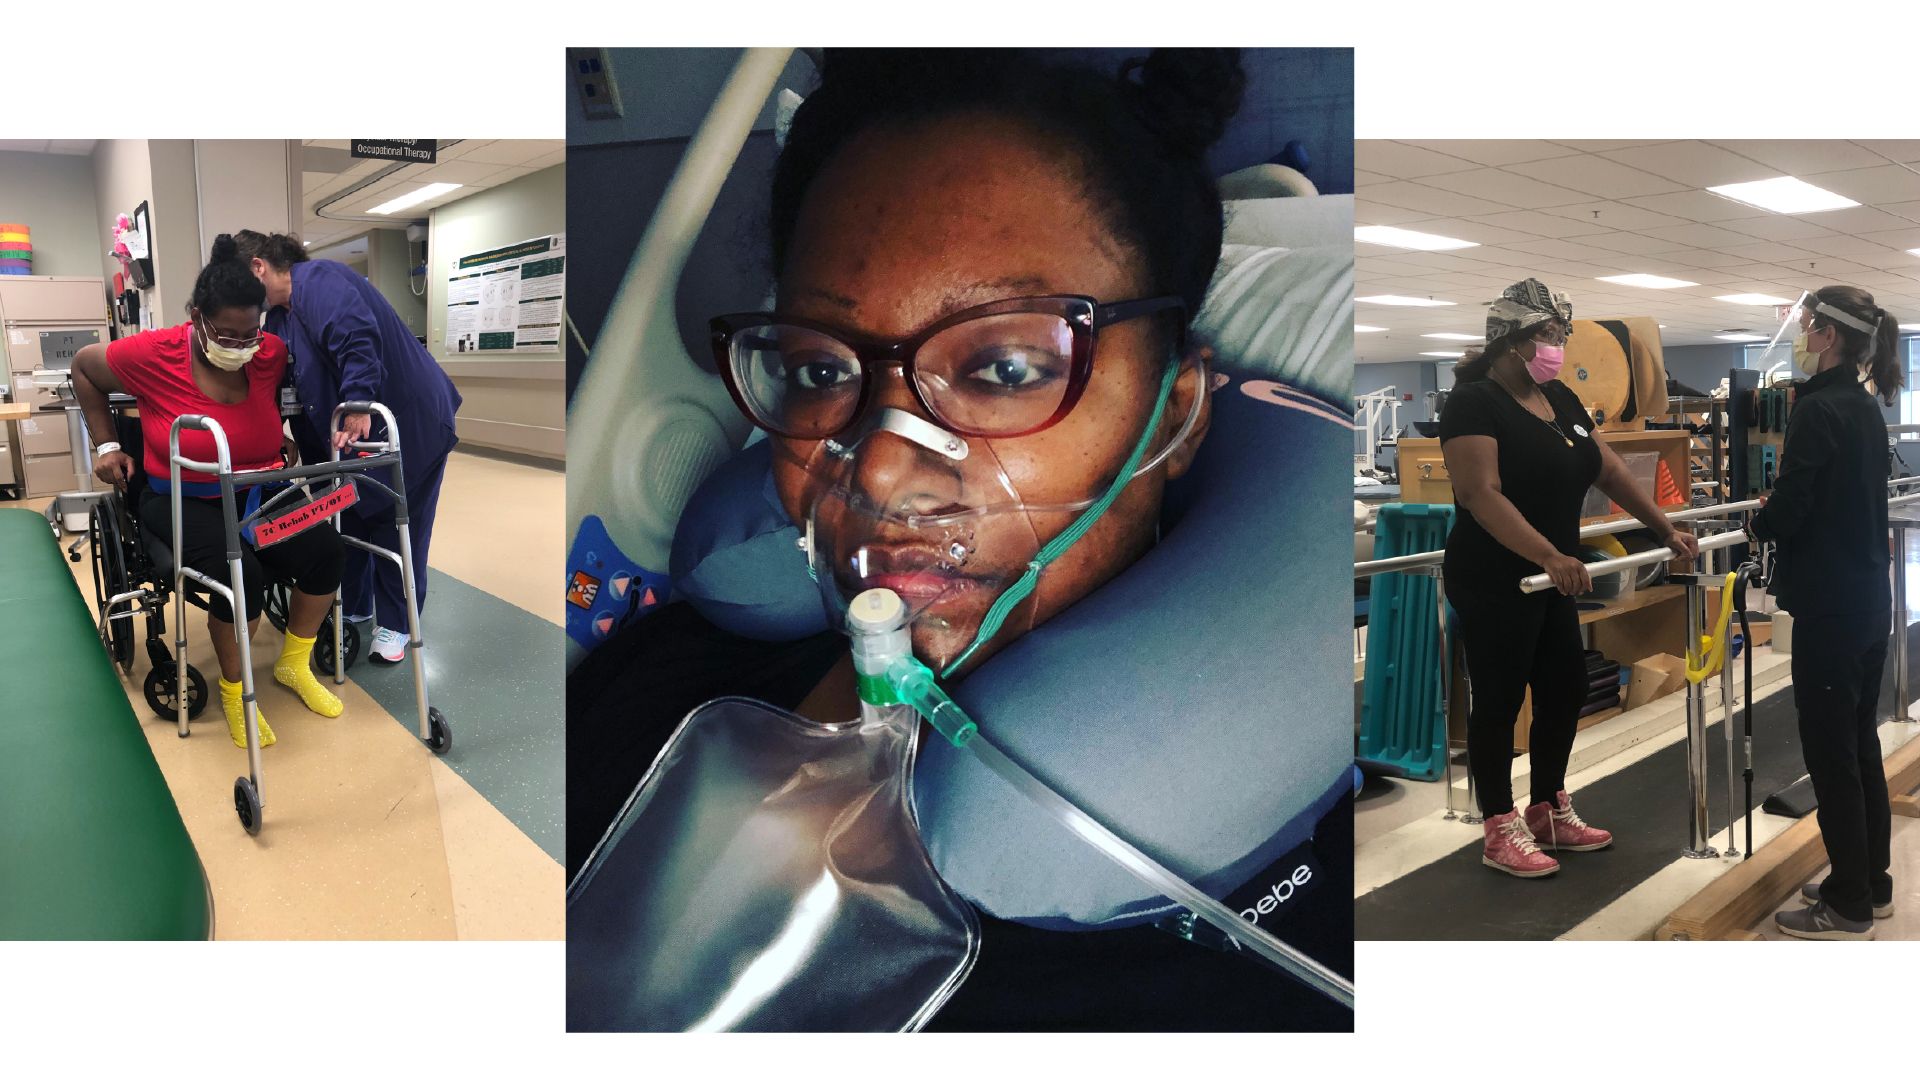  Brown spent more than a month in the hospital, 31 days of which she was on a ventilator. Here’s, she is shown recovering from COVID-19.